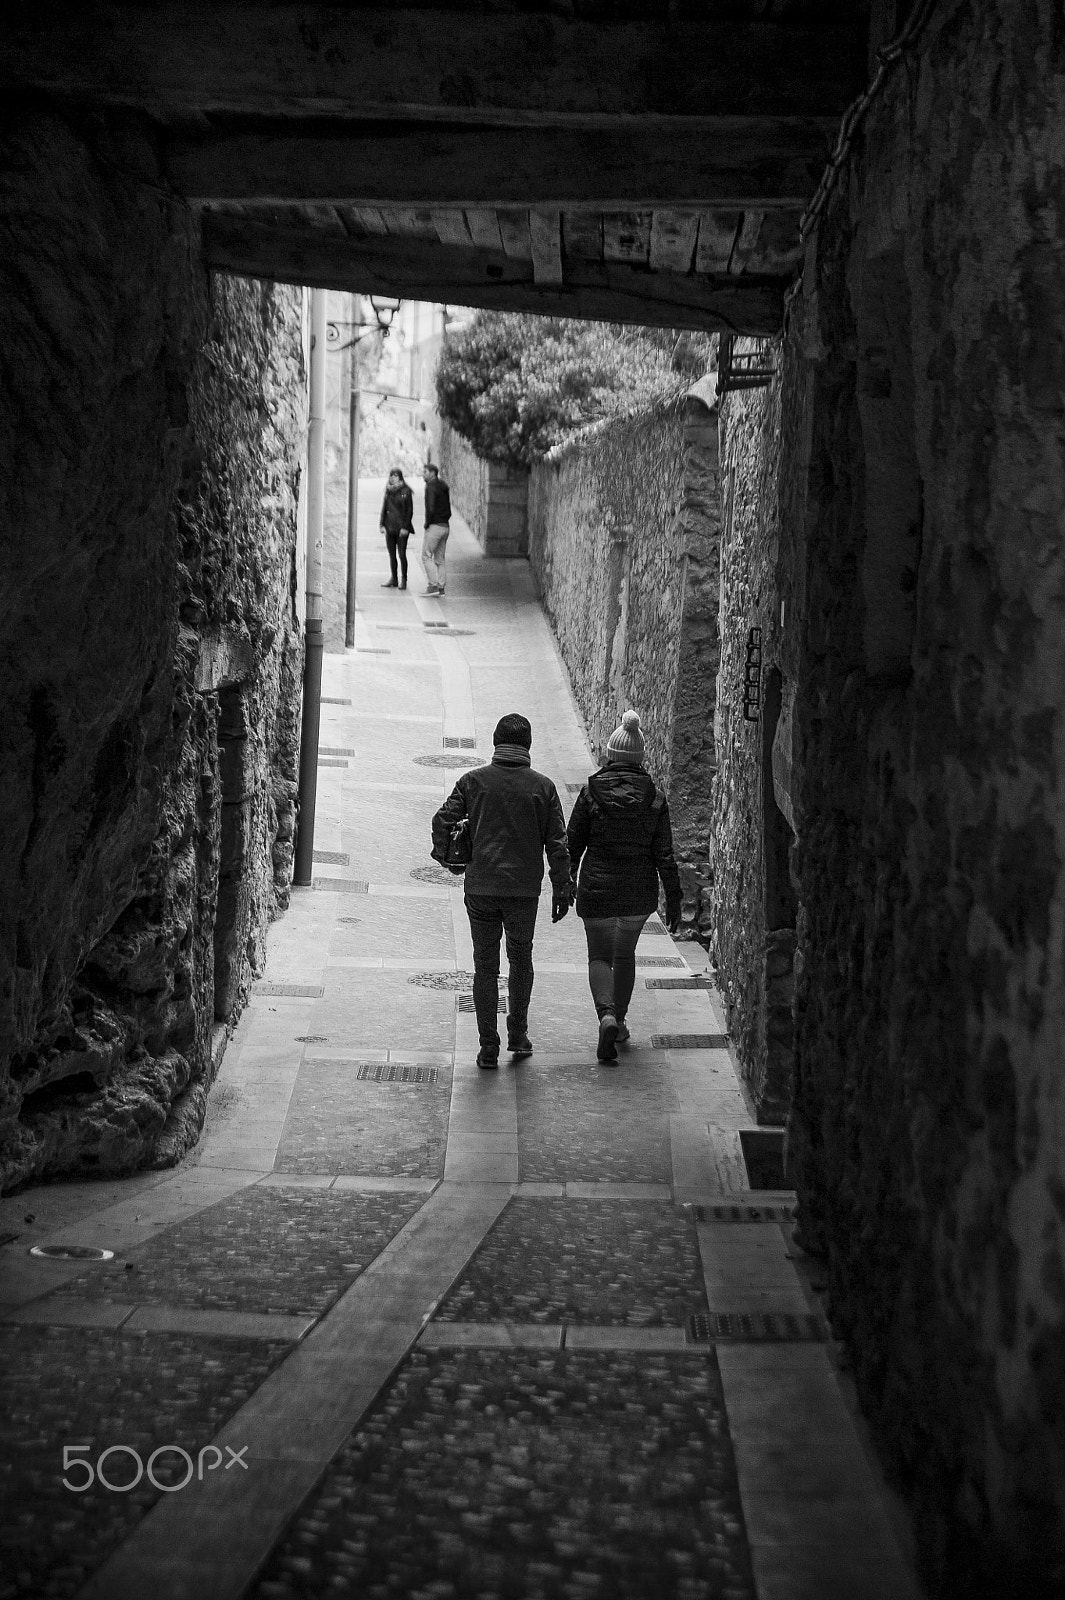 Nikon D700 + Tamron SP 24-70mm F2.8 Di VC USD sample photo. People crossing an old urban stone-walled passage photography